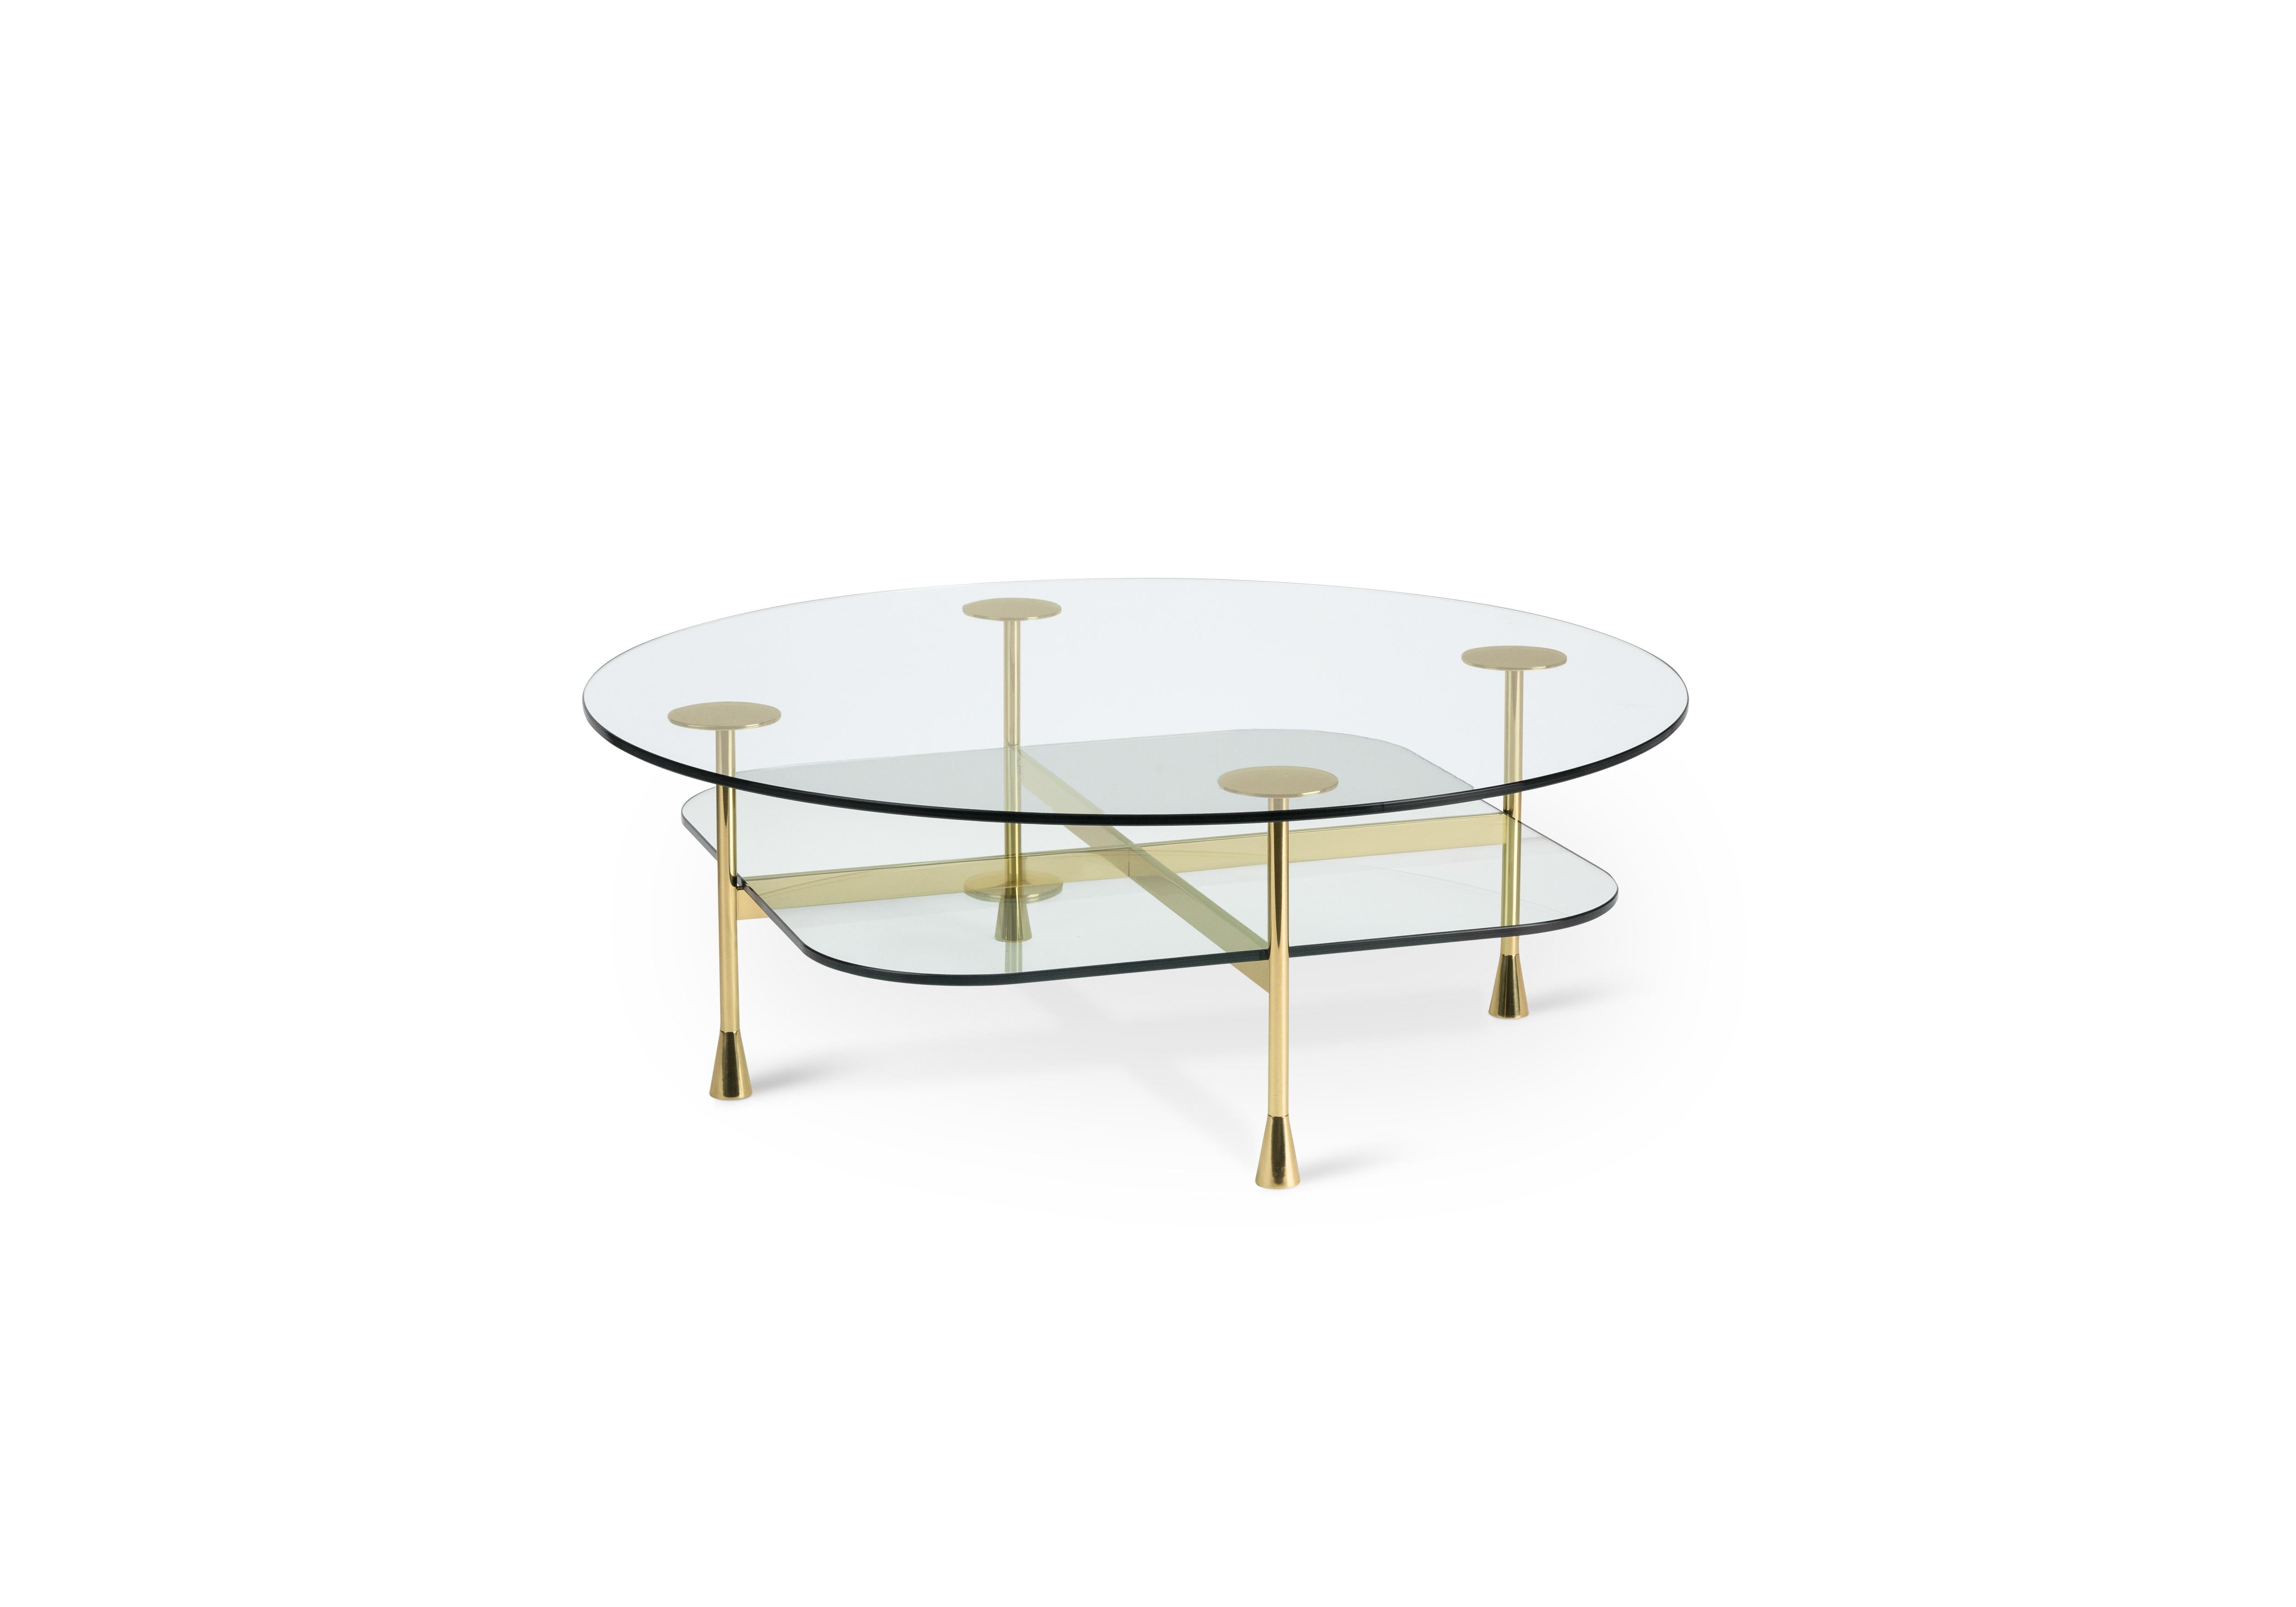 Side table in crystal and brass
The Vitruvian man and the idea of the human body perfection: this is how the designer sees this central coffee table shaped perfectly with the squared and round shape. The glass, in the double overlapping layer,